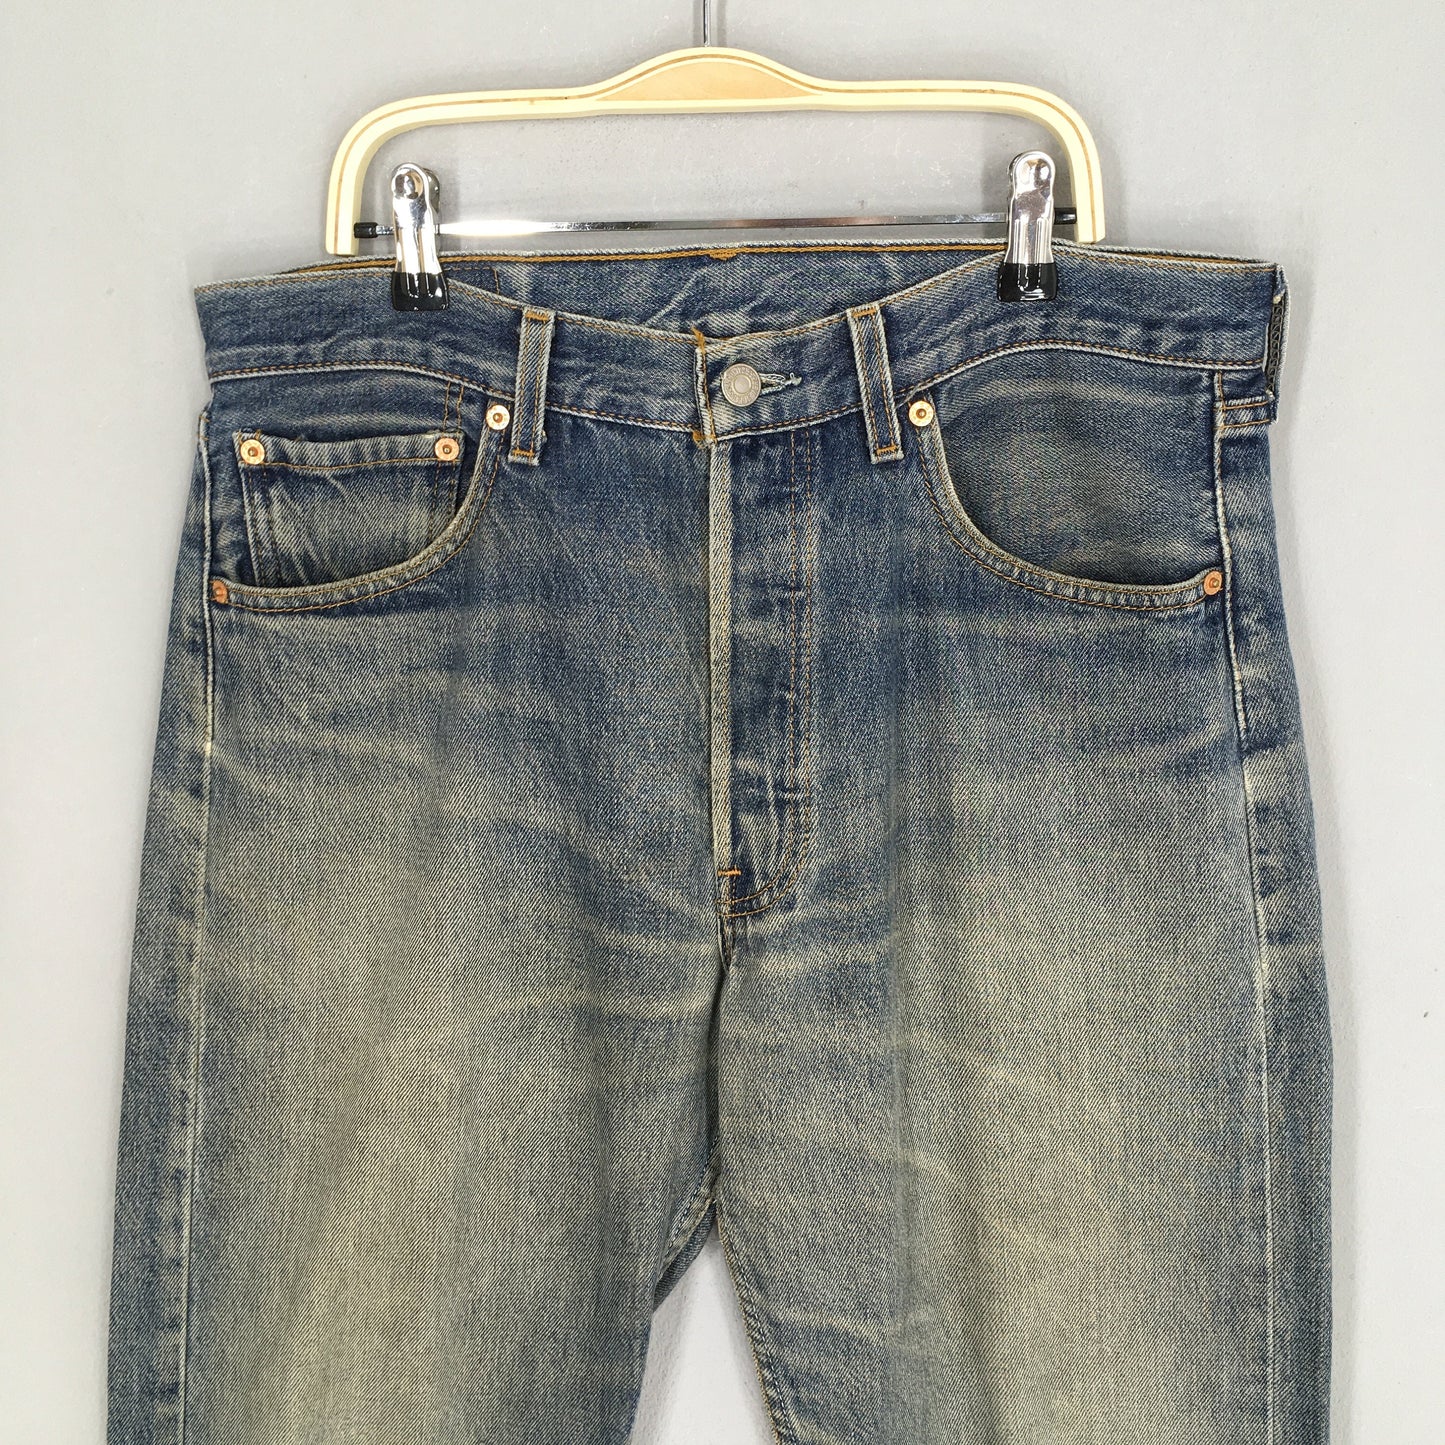 Levi's 501 Faded Distressed Jeans Size 31x29